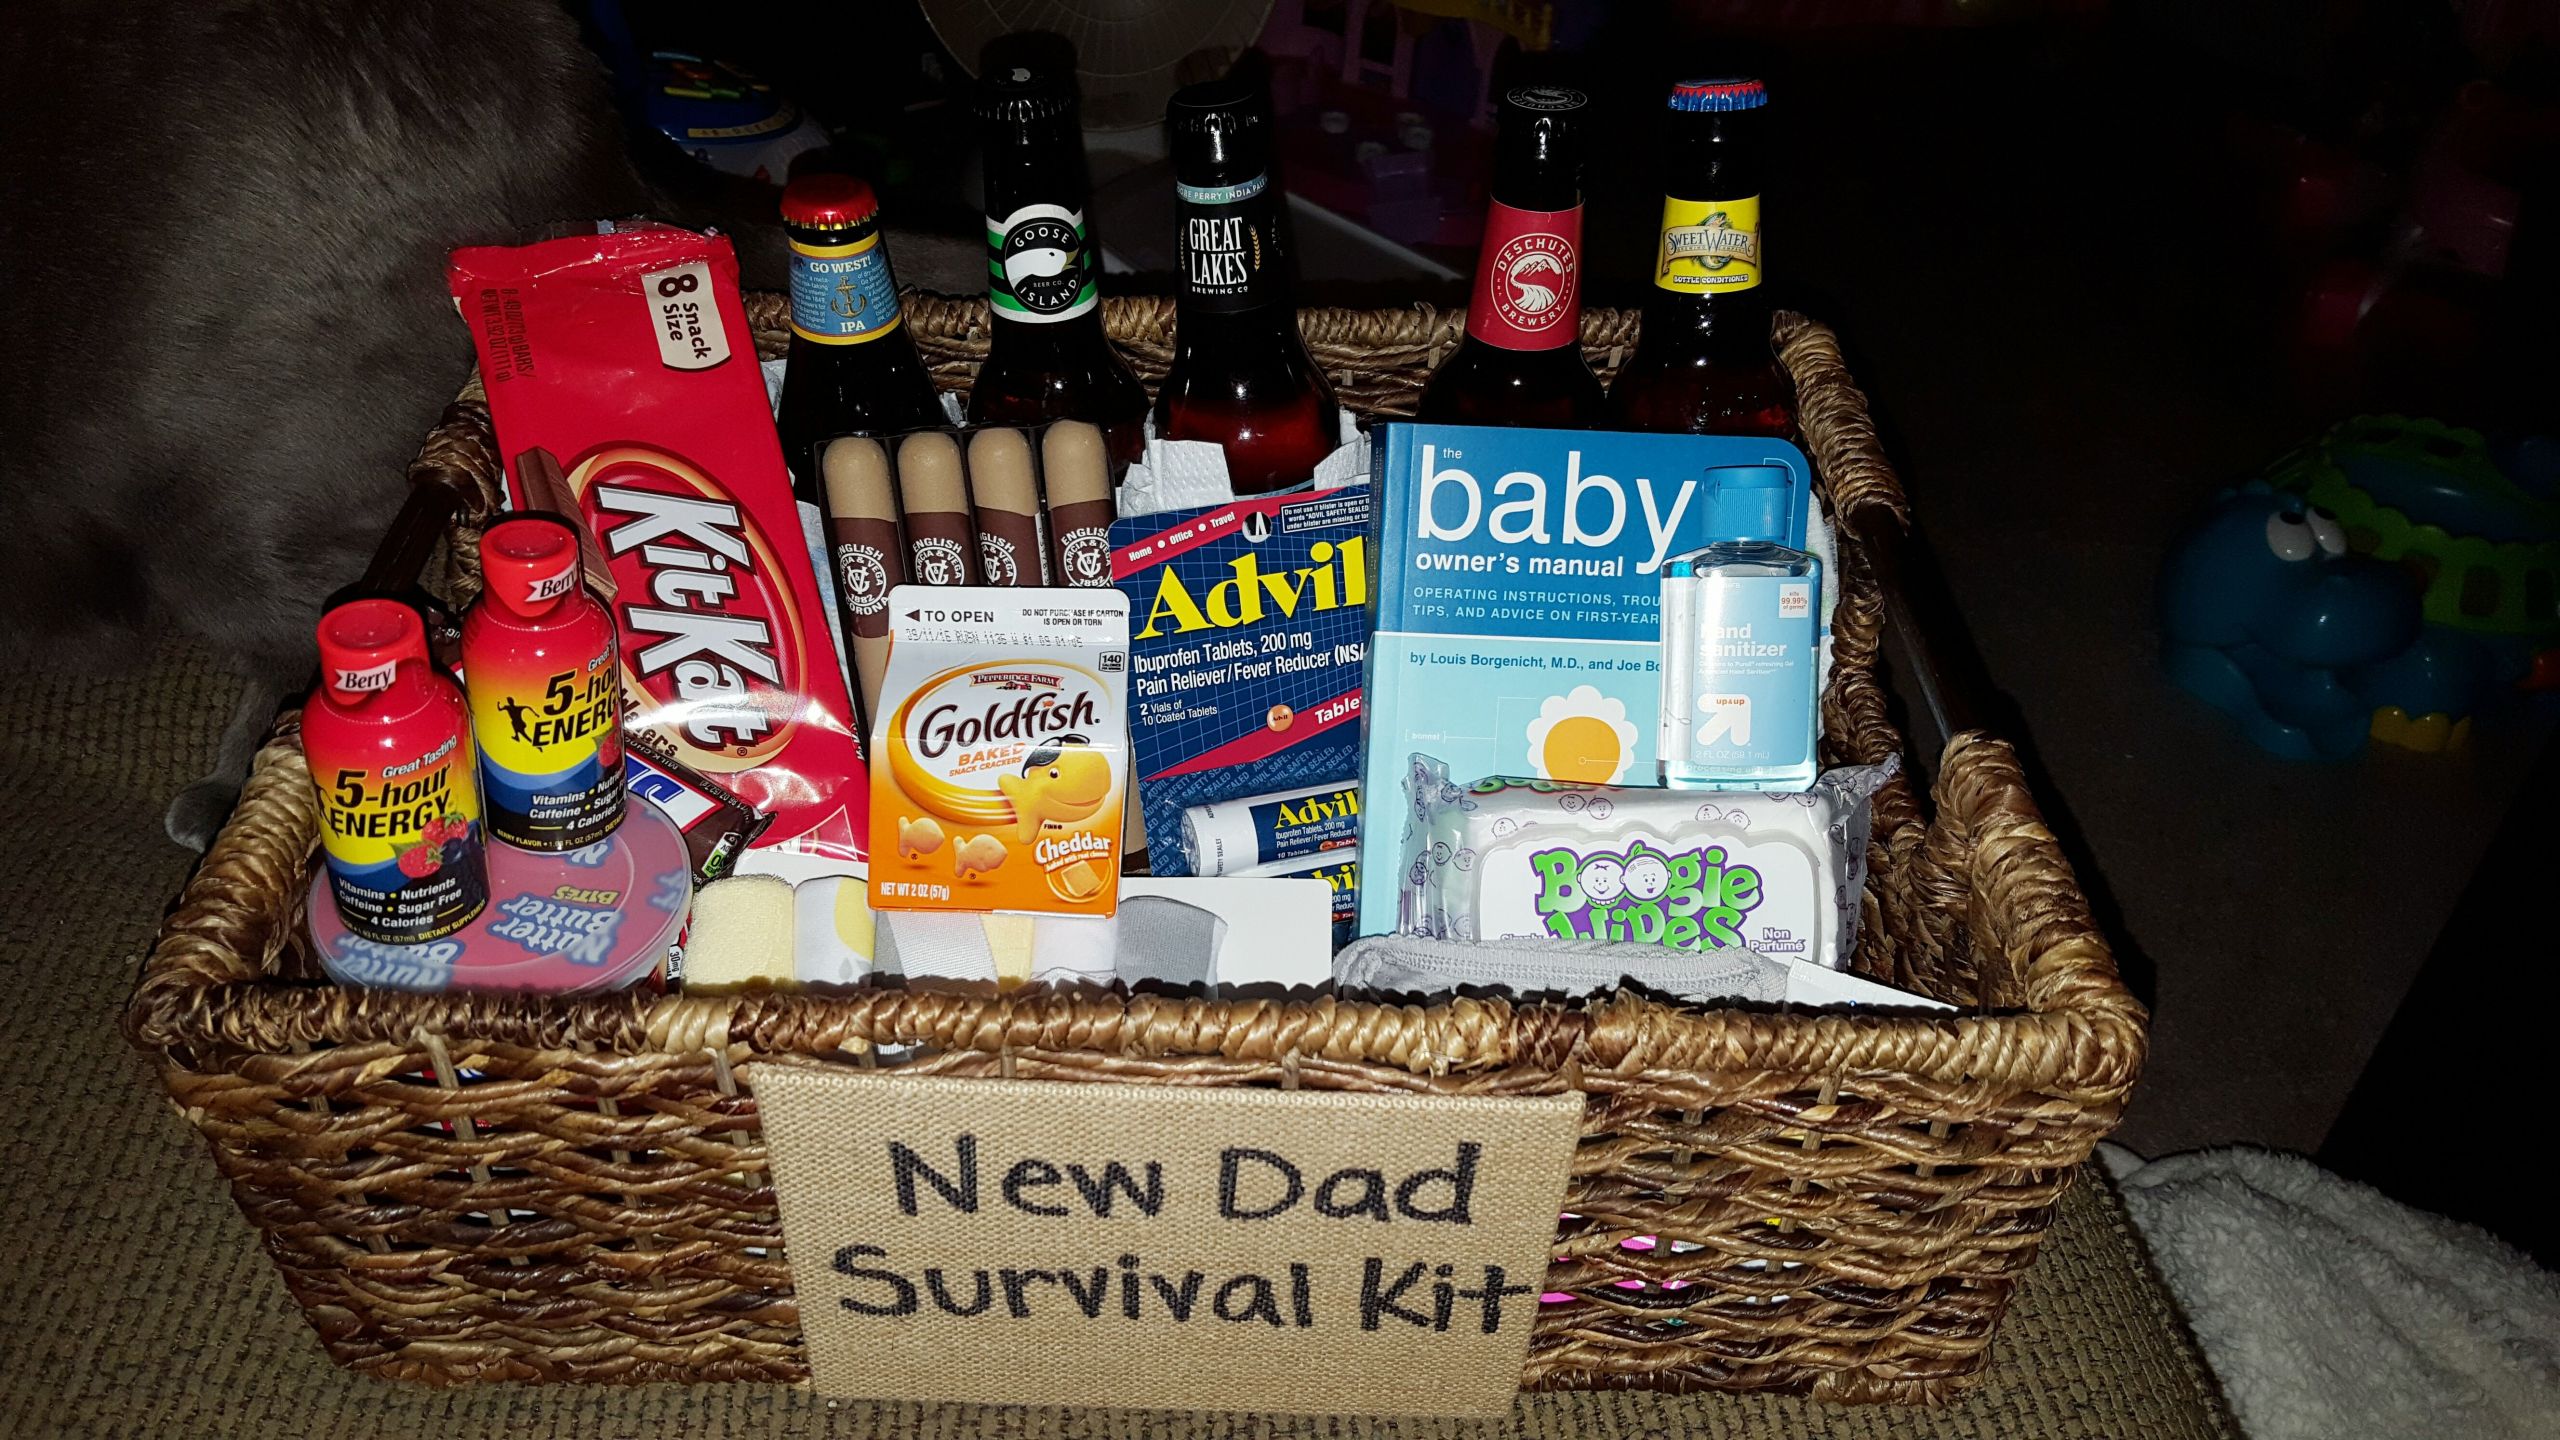 New Daddy Gift Basket Ideas
 The 25 best New dad survival kit ideas on Pinterest